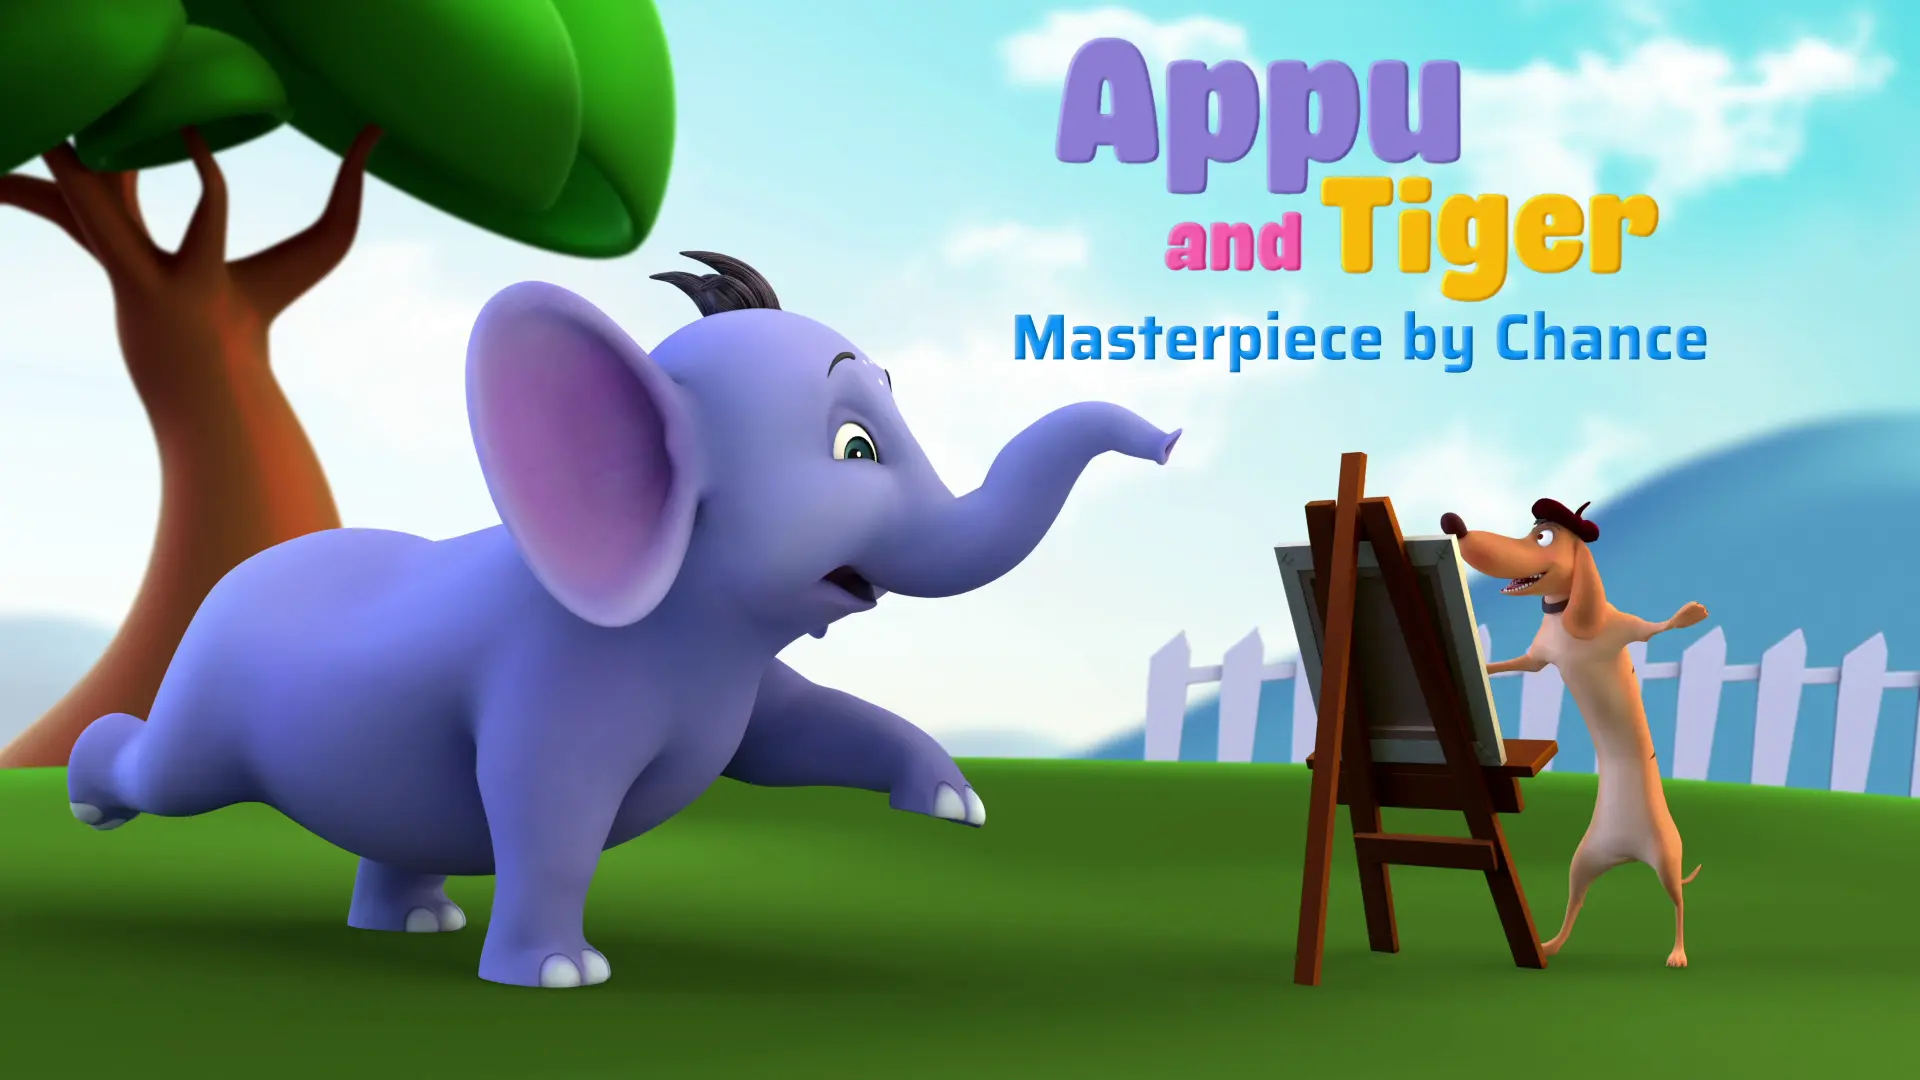 Screenshot from : Appu and Tiger - Masterpiece by Chance